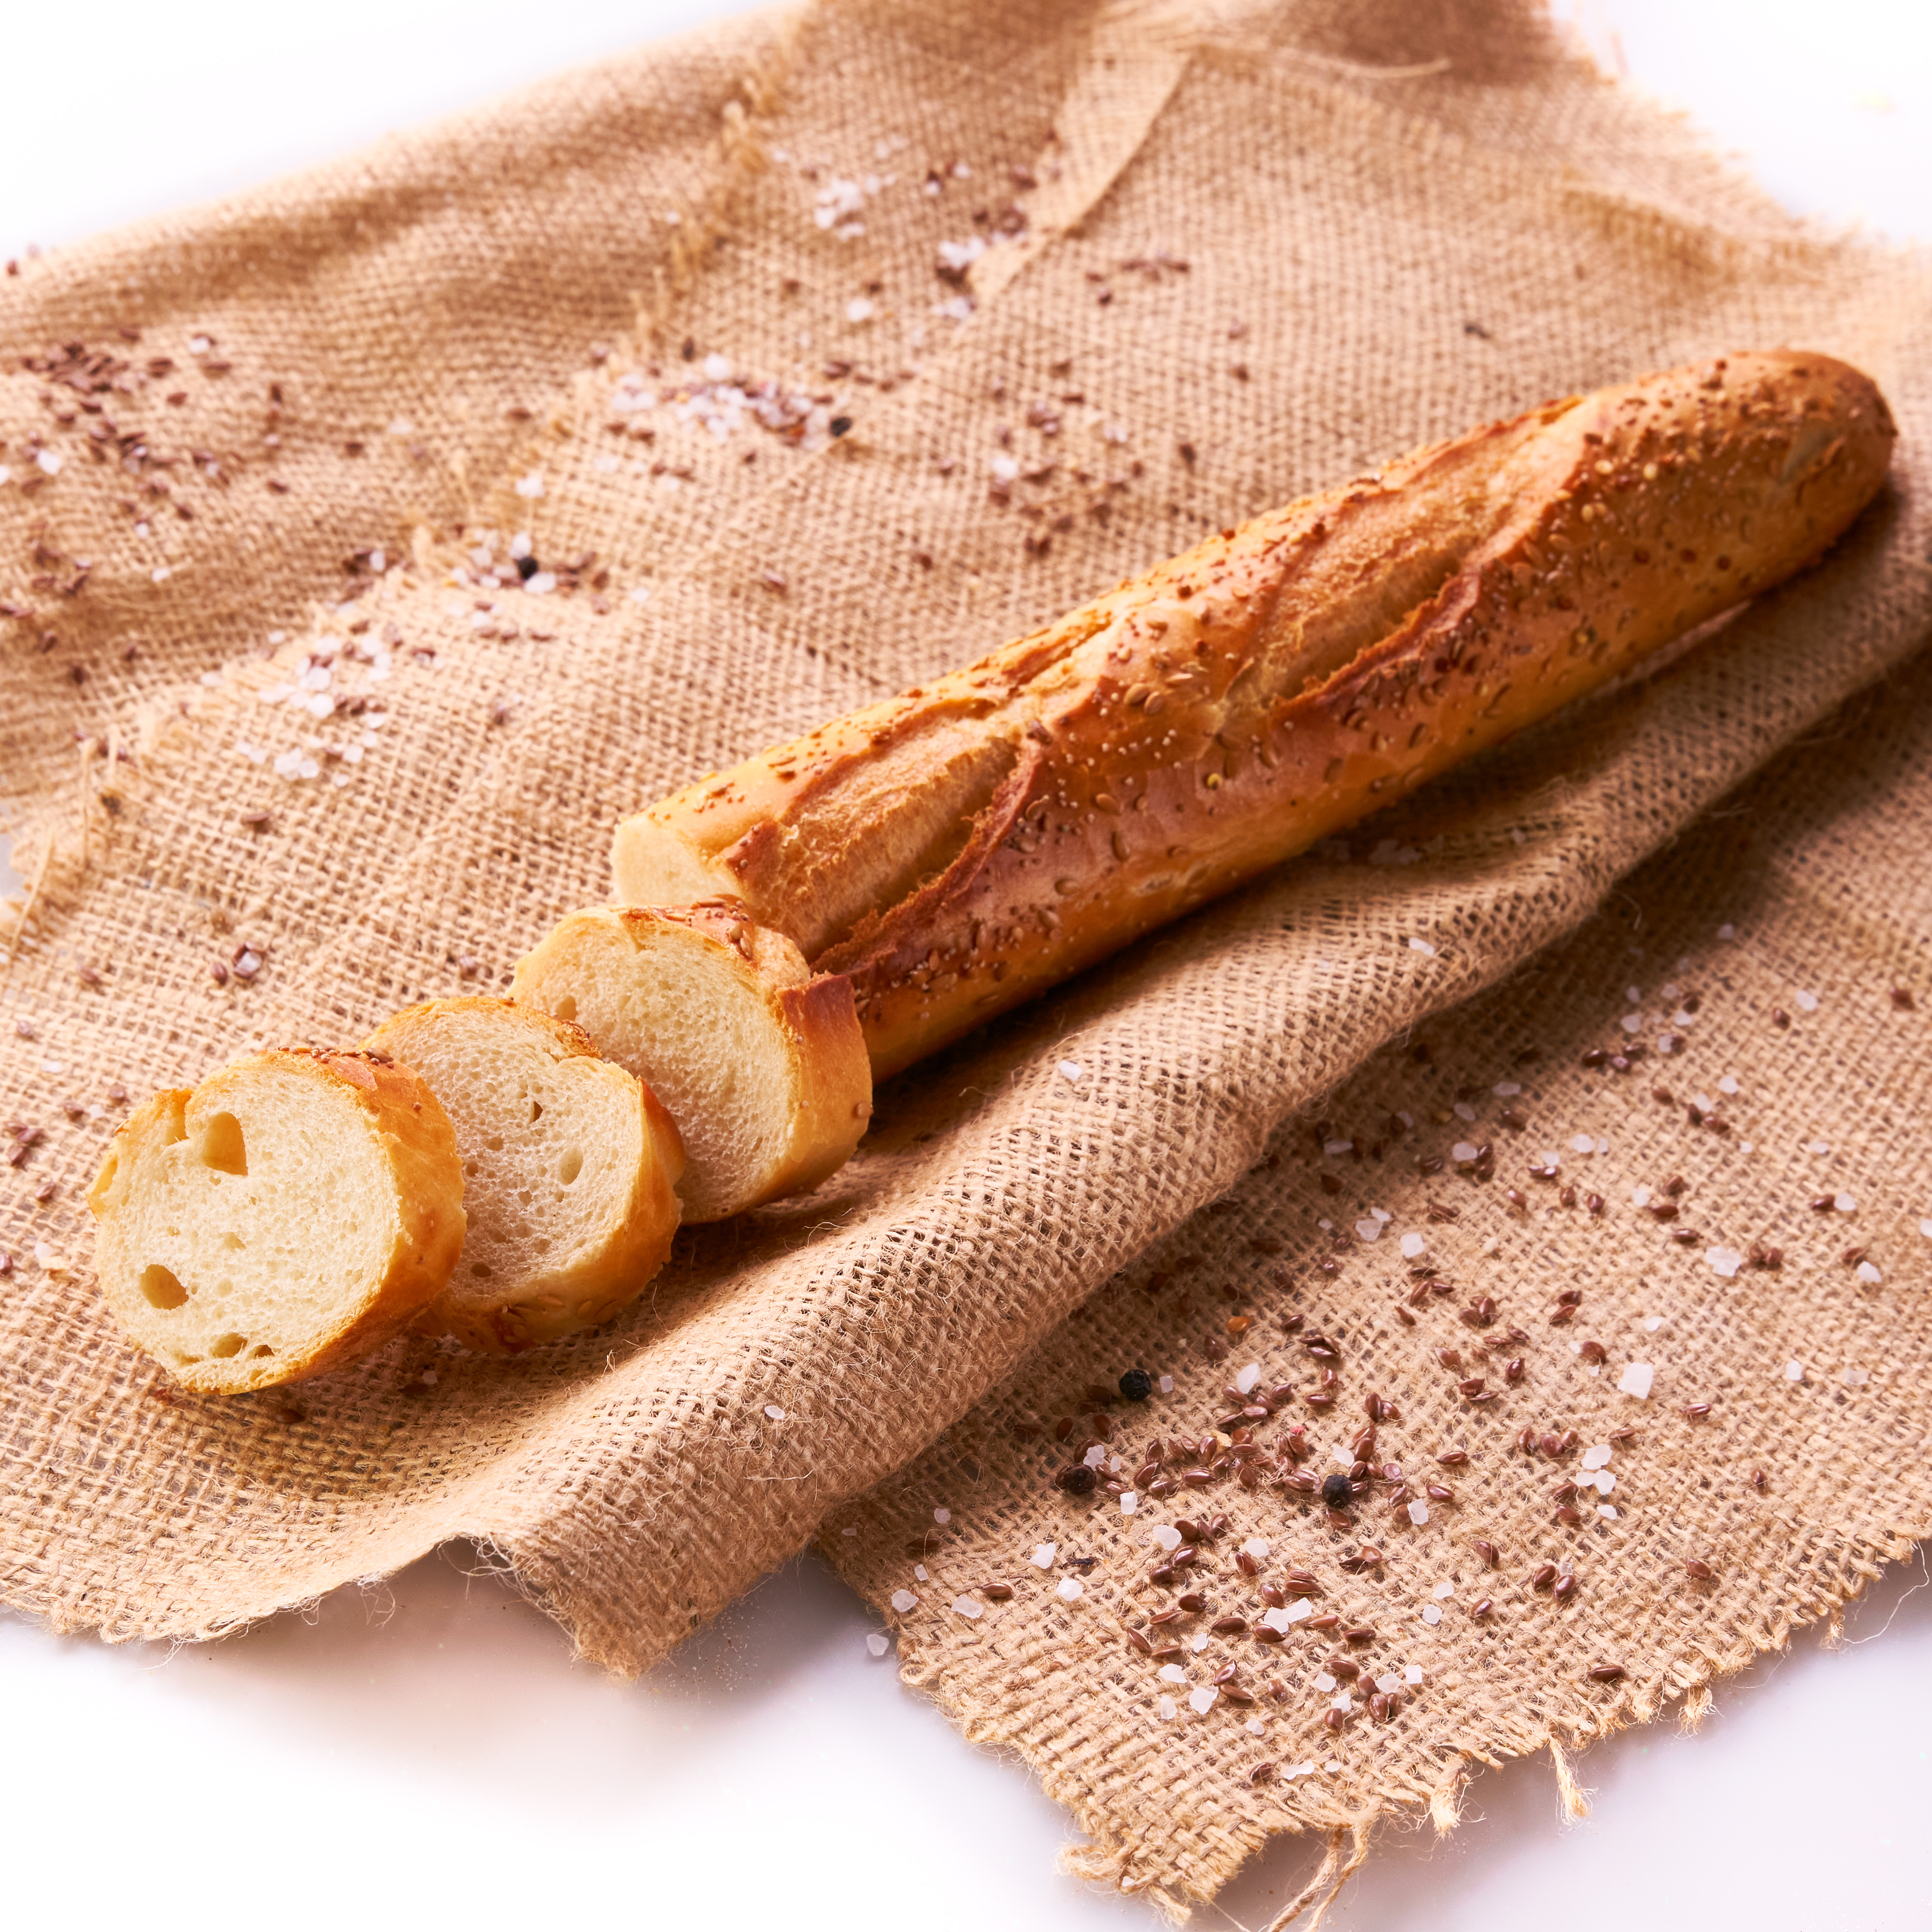 Country Baguette 250g